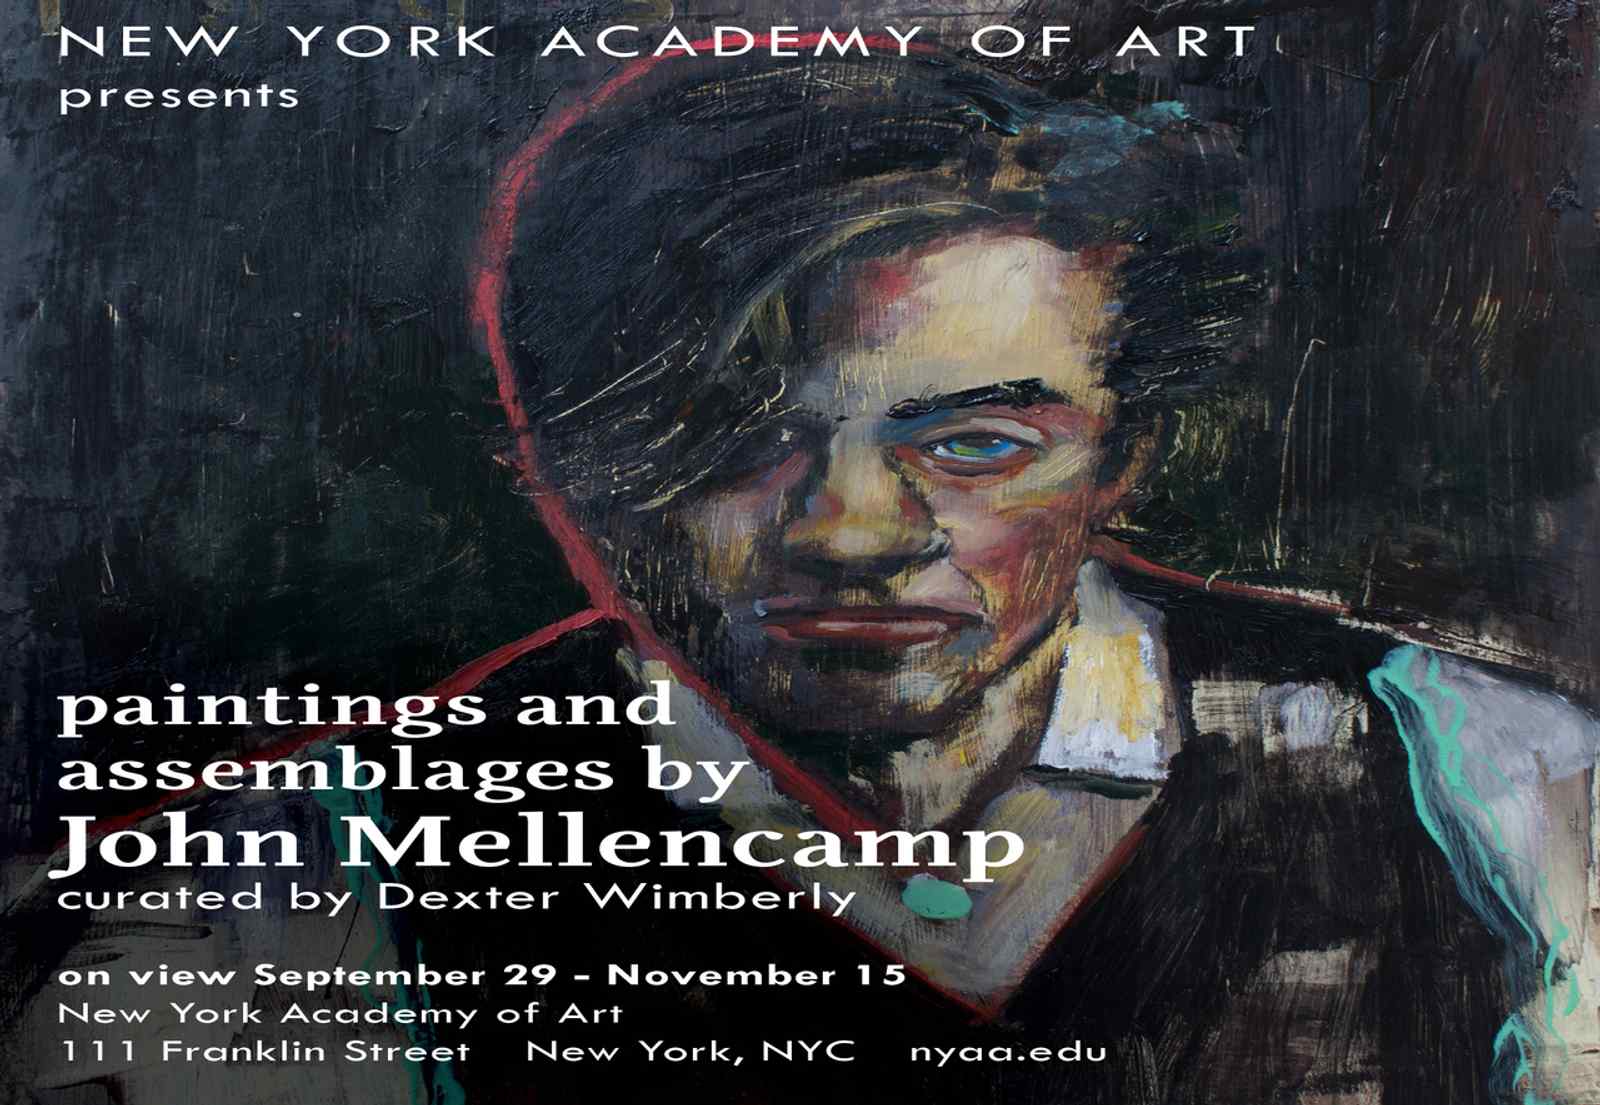 John Mellencamp Paintings and Assemblages Exhibition Comes To The New York Academy of Art